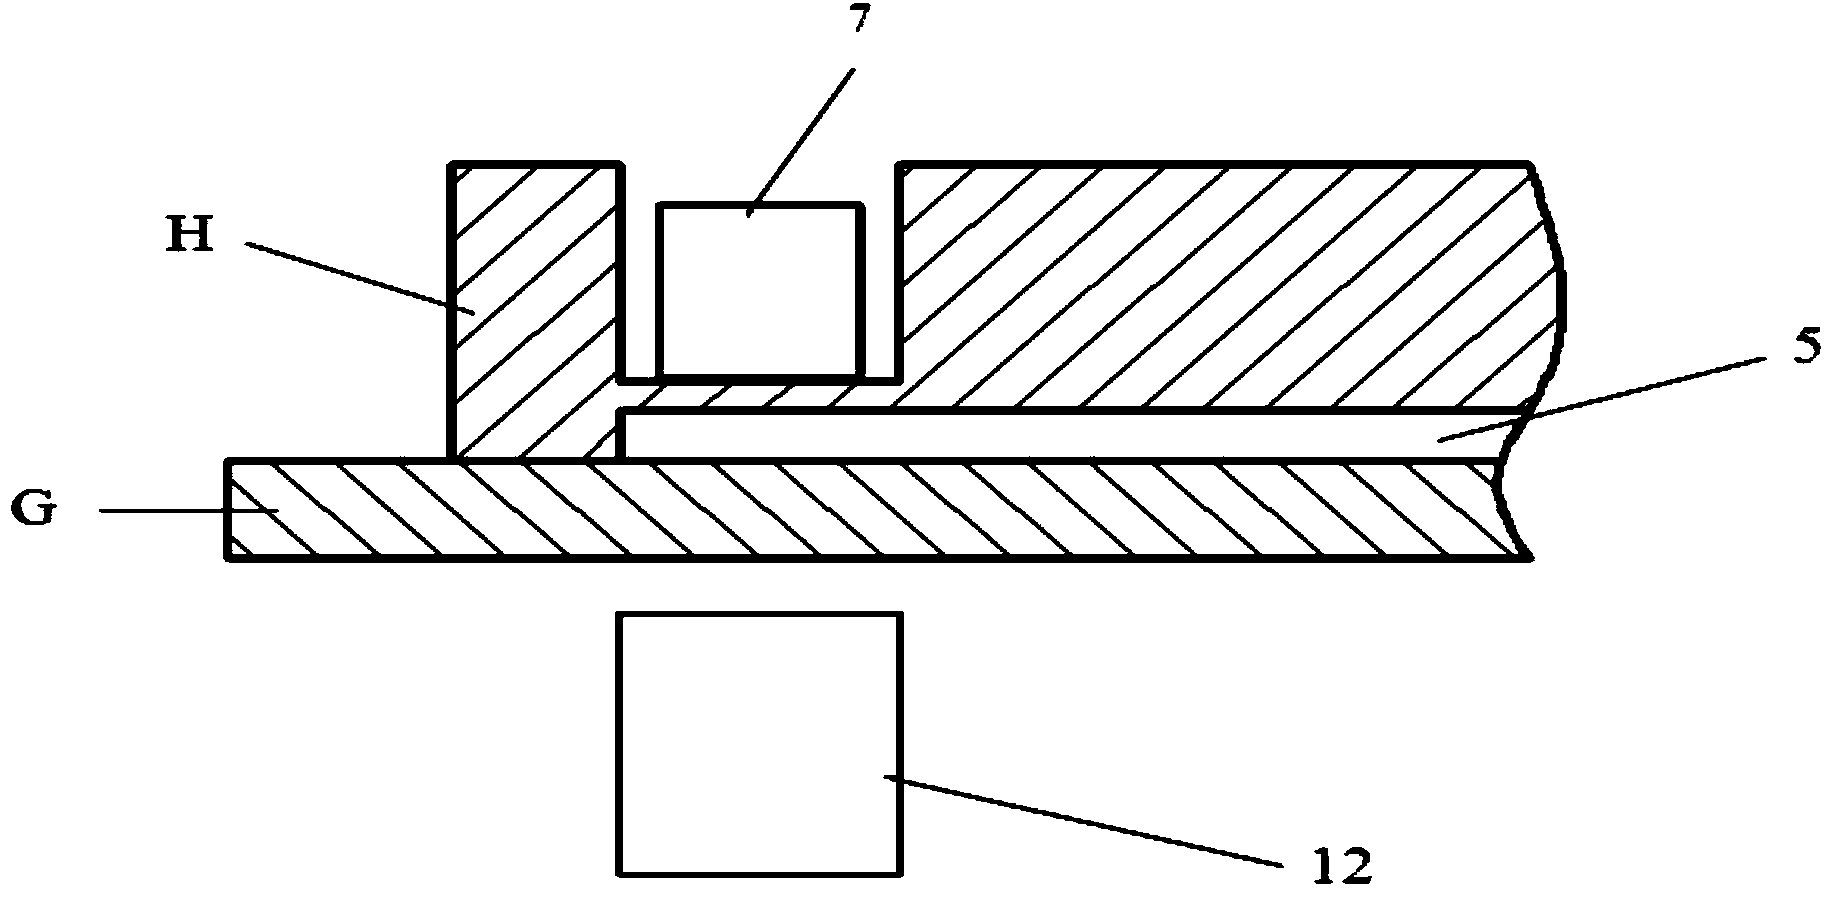 Device and method for full-automatically sorting circulating tumor cells on micro-fluidic chip